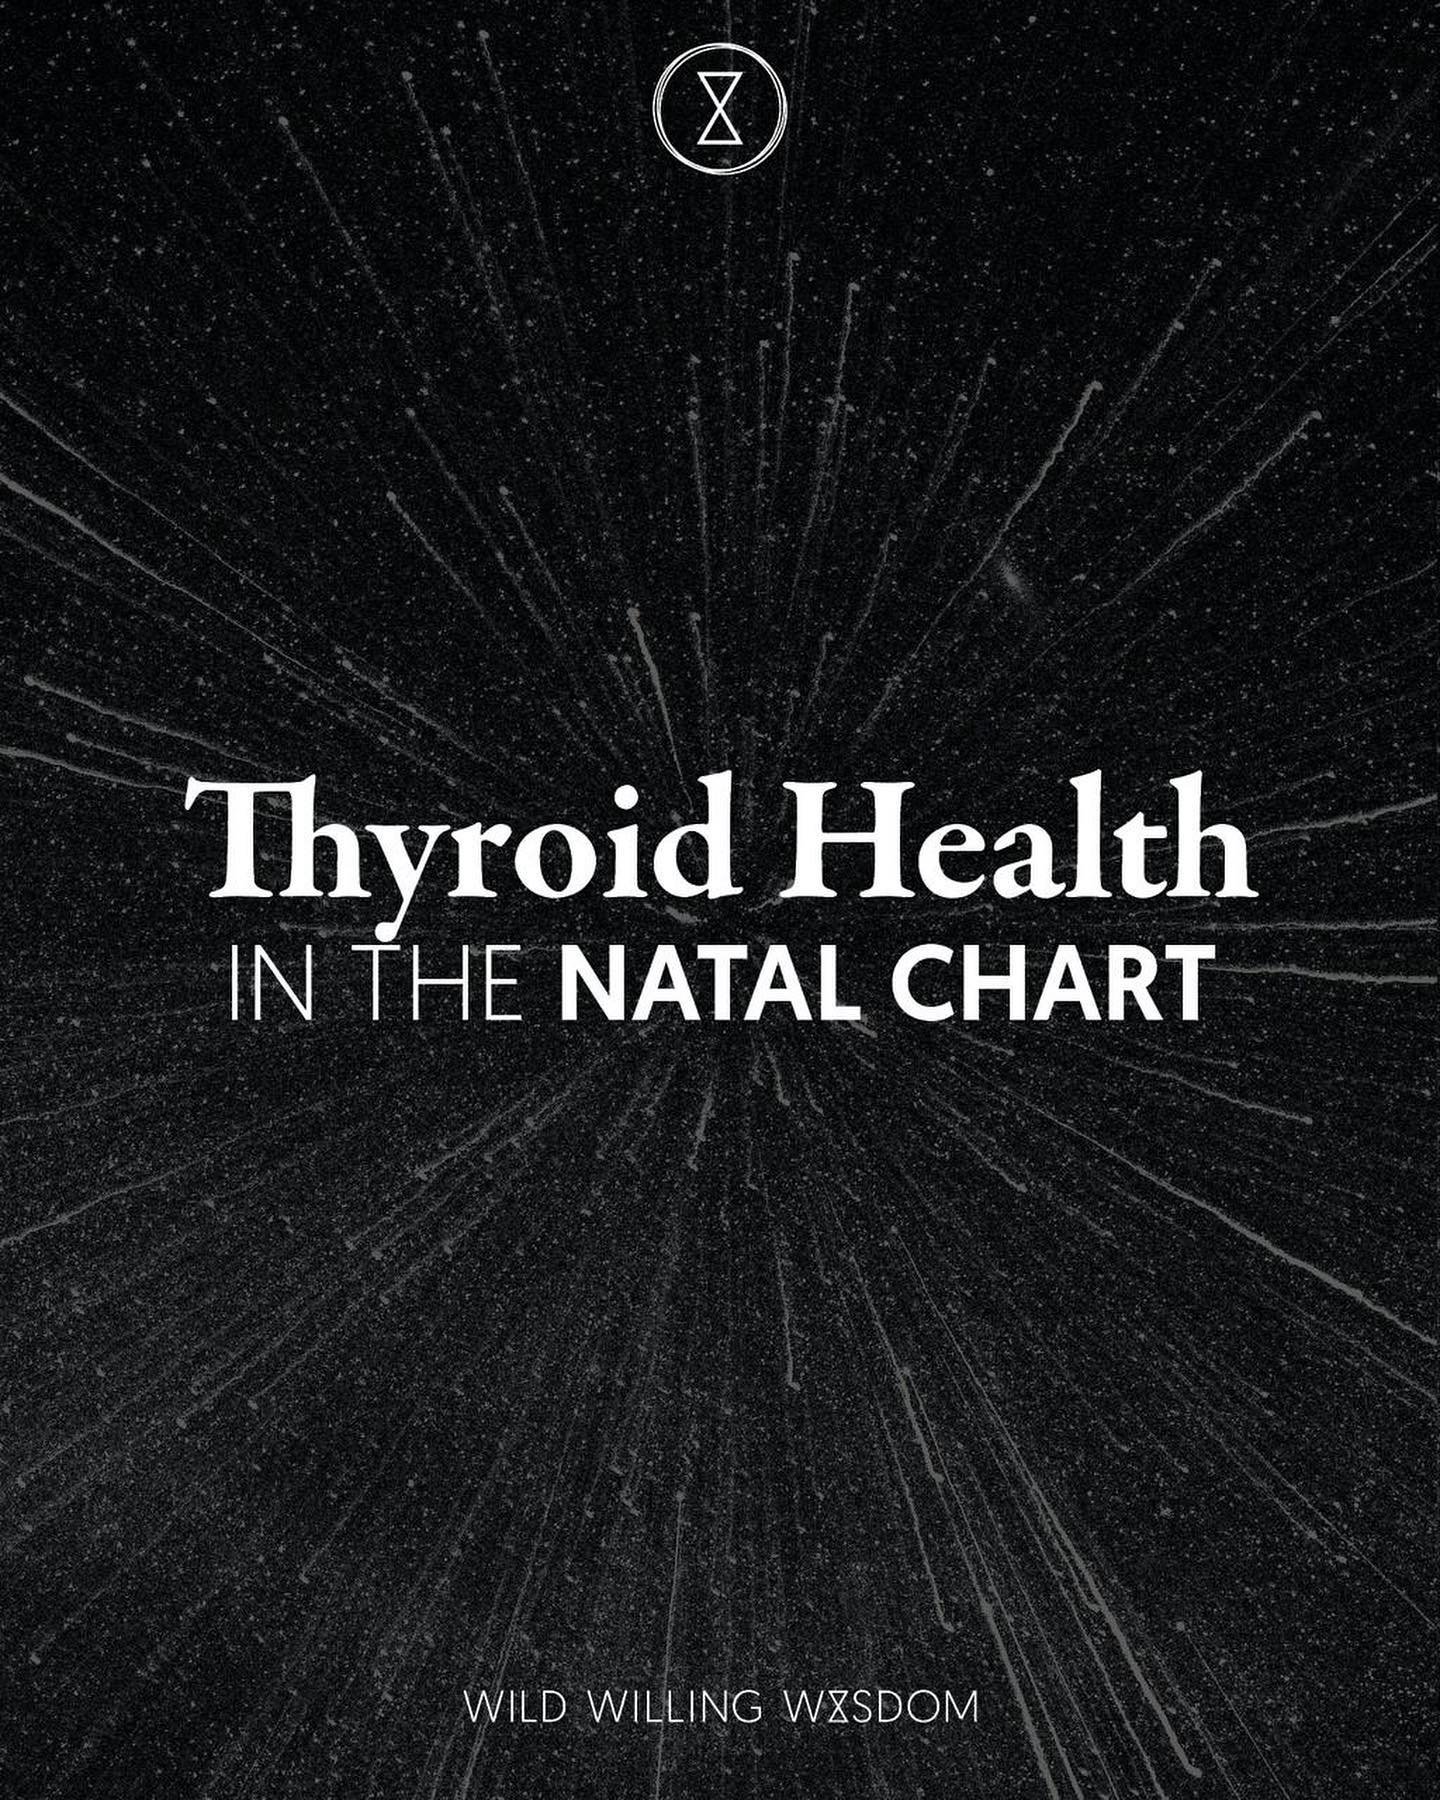 The natal chart is a valuable and reliable tool as a language for self-awareness&mdash;extending from personality archetypes well into the realm of medical and fertility astrology.

A medical astrology assessment can be used not only for preventative